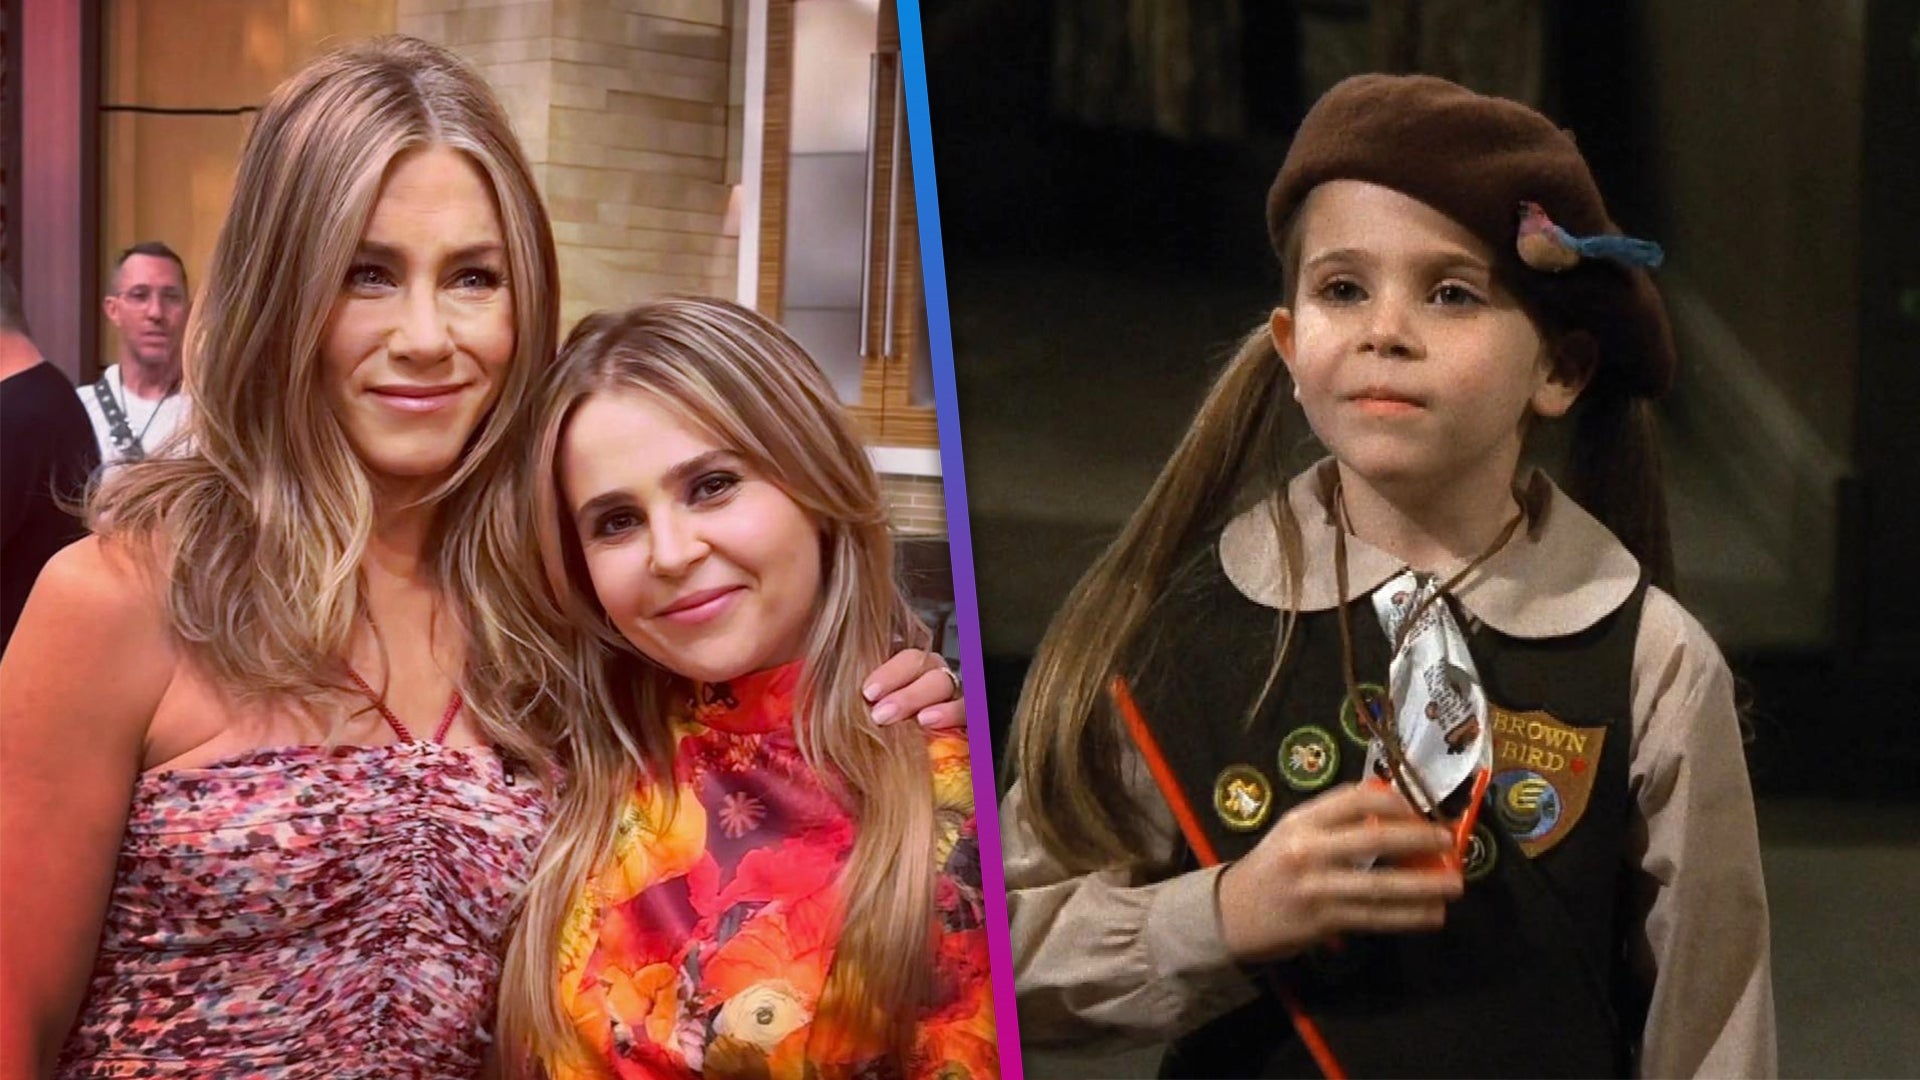 Inside Jennifer Aniston’s 'Friends' Reunion With Mae Whitman 26 Years Later